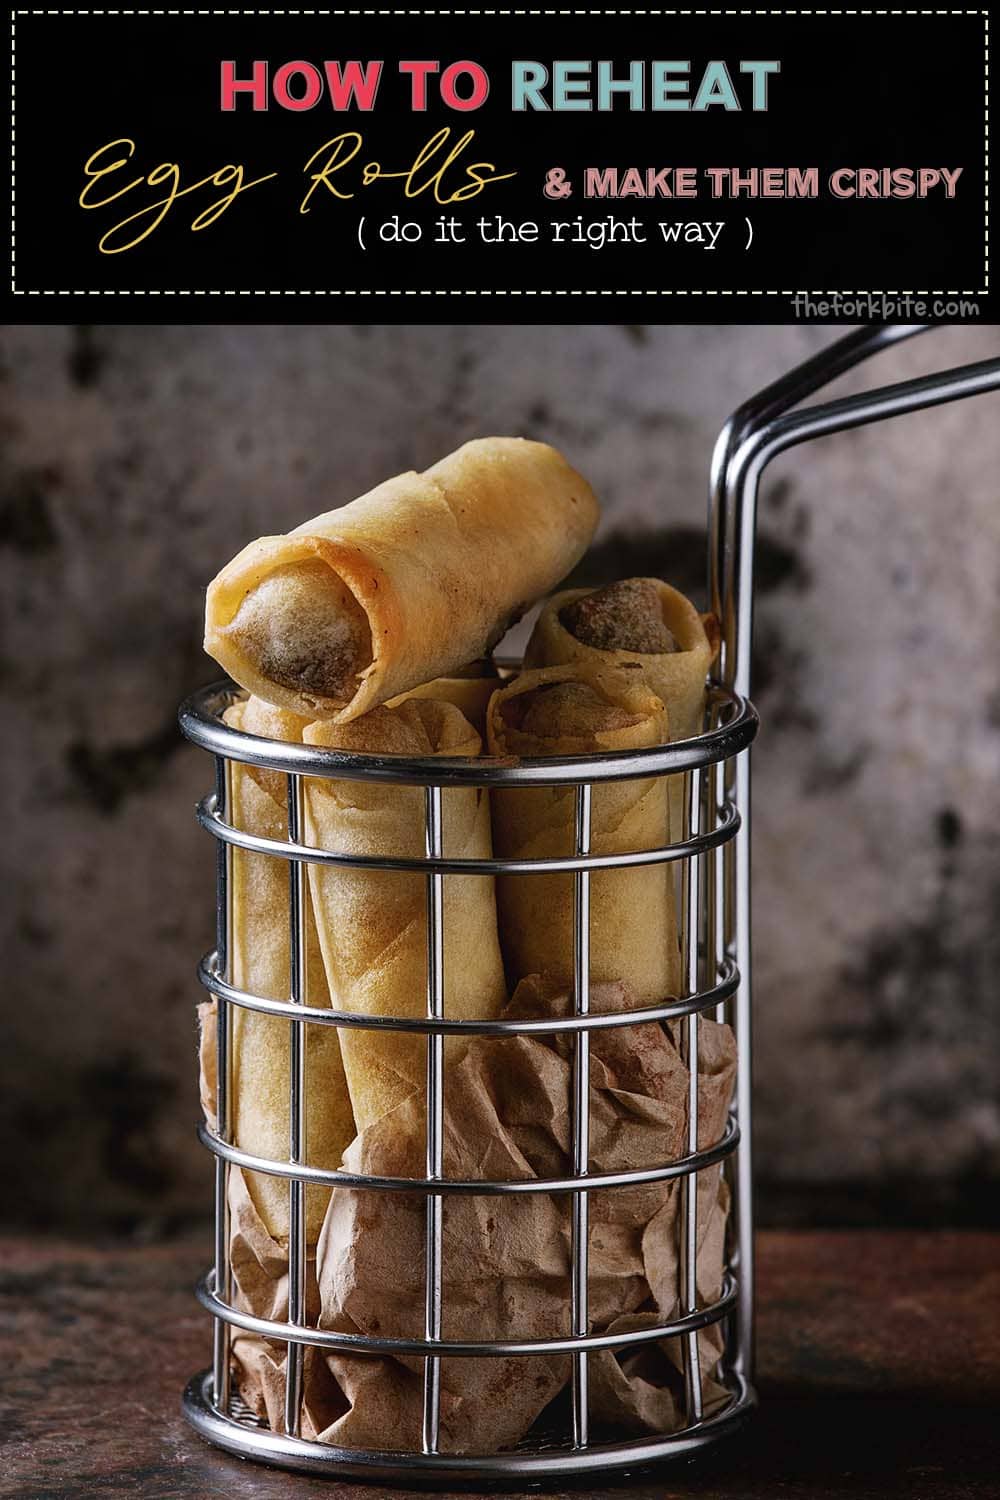 Freshly-cooked egg rolls are crispy because they were deep-fried. In reheating last night’s egg rolls, you should make sure that you preserve the crunch.